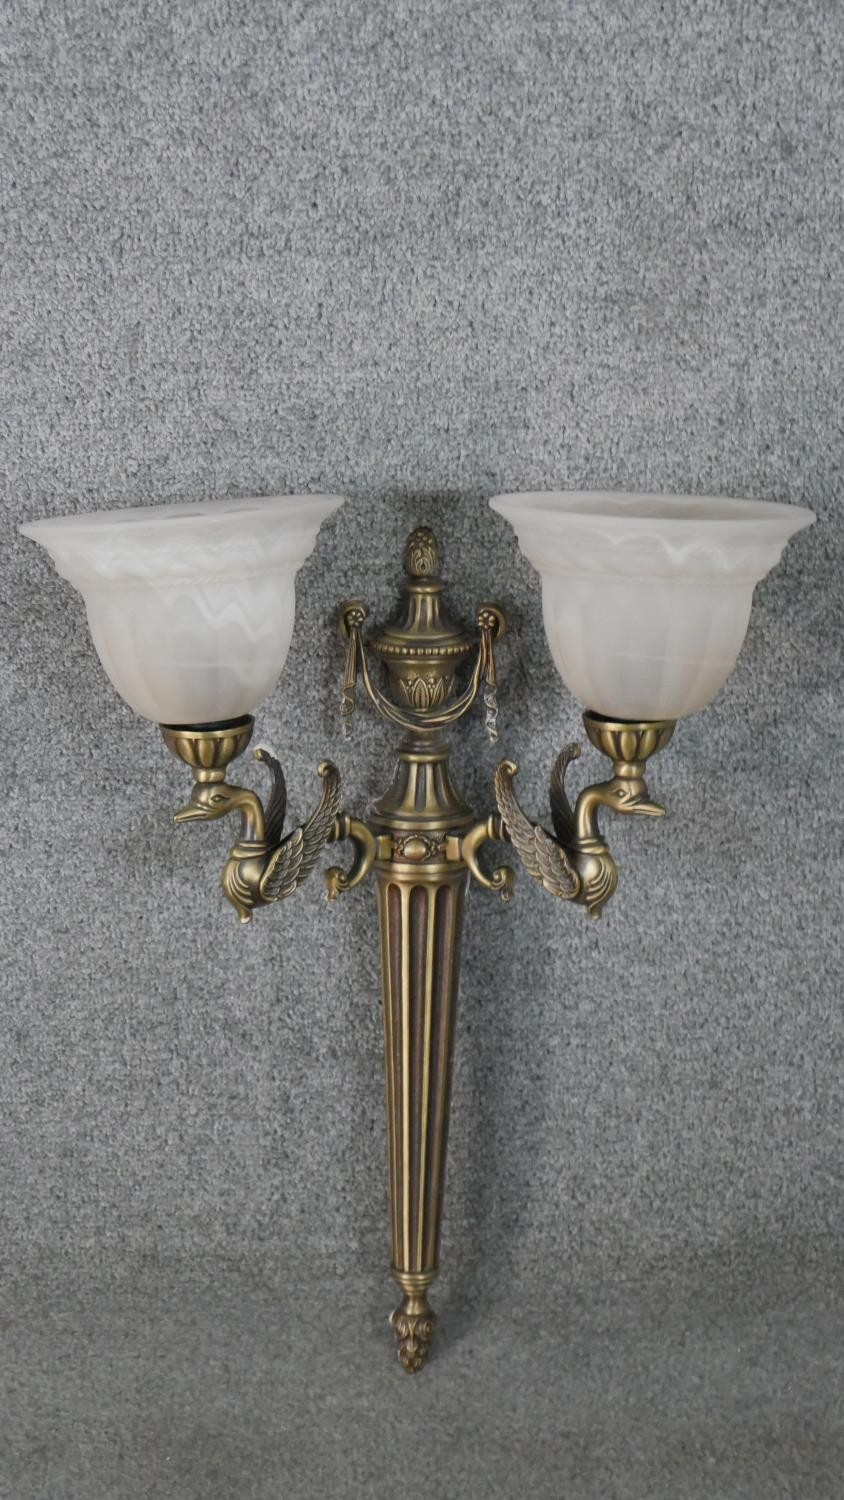 A two branch classical design brass swan head and ribbon design wall light with alabaster glass